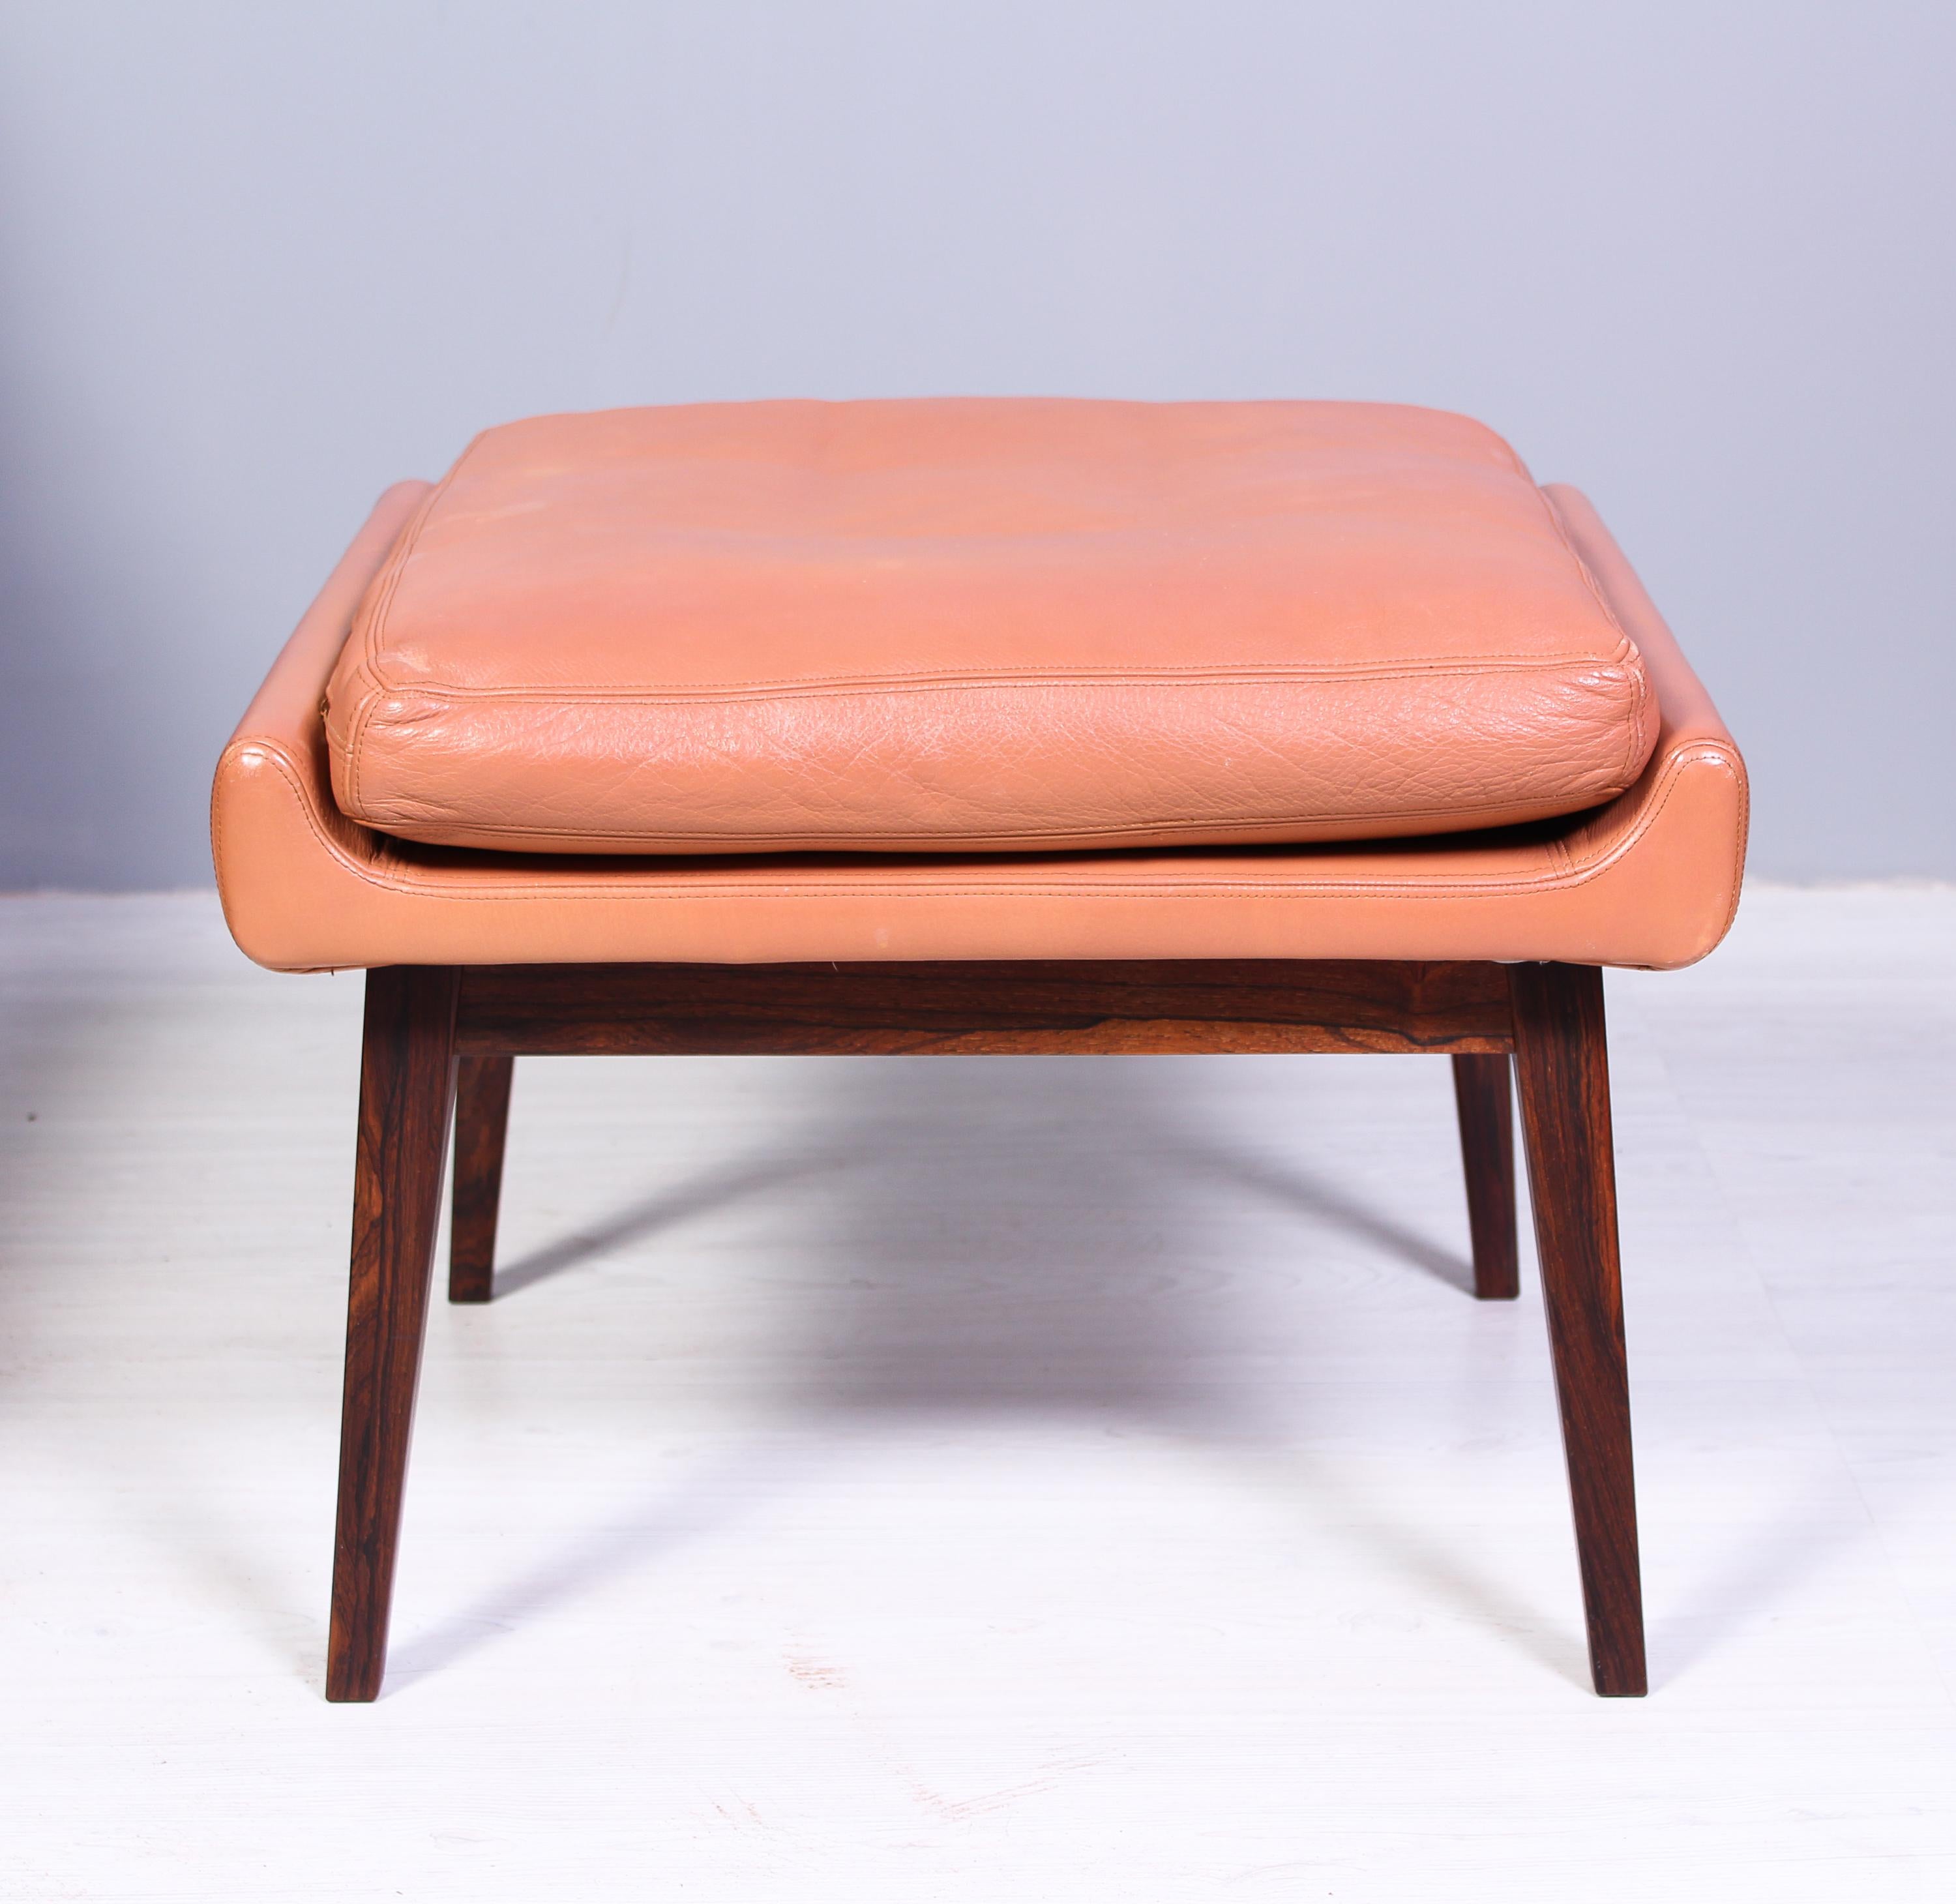 Leather & Rosewood Lounge Chairs and Ottoman by Werner Langenfled, Denmark 1960s For Sale 8